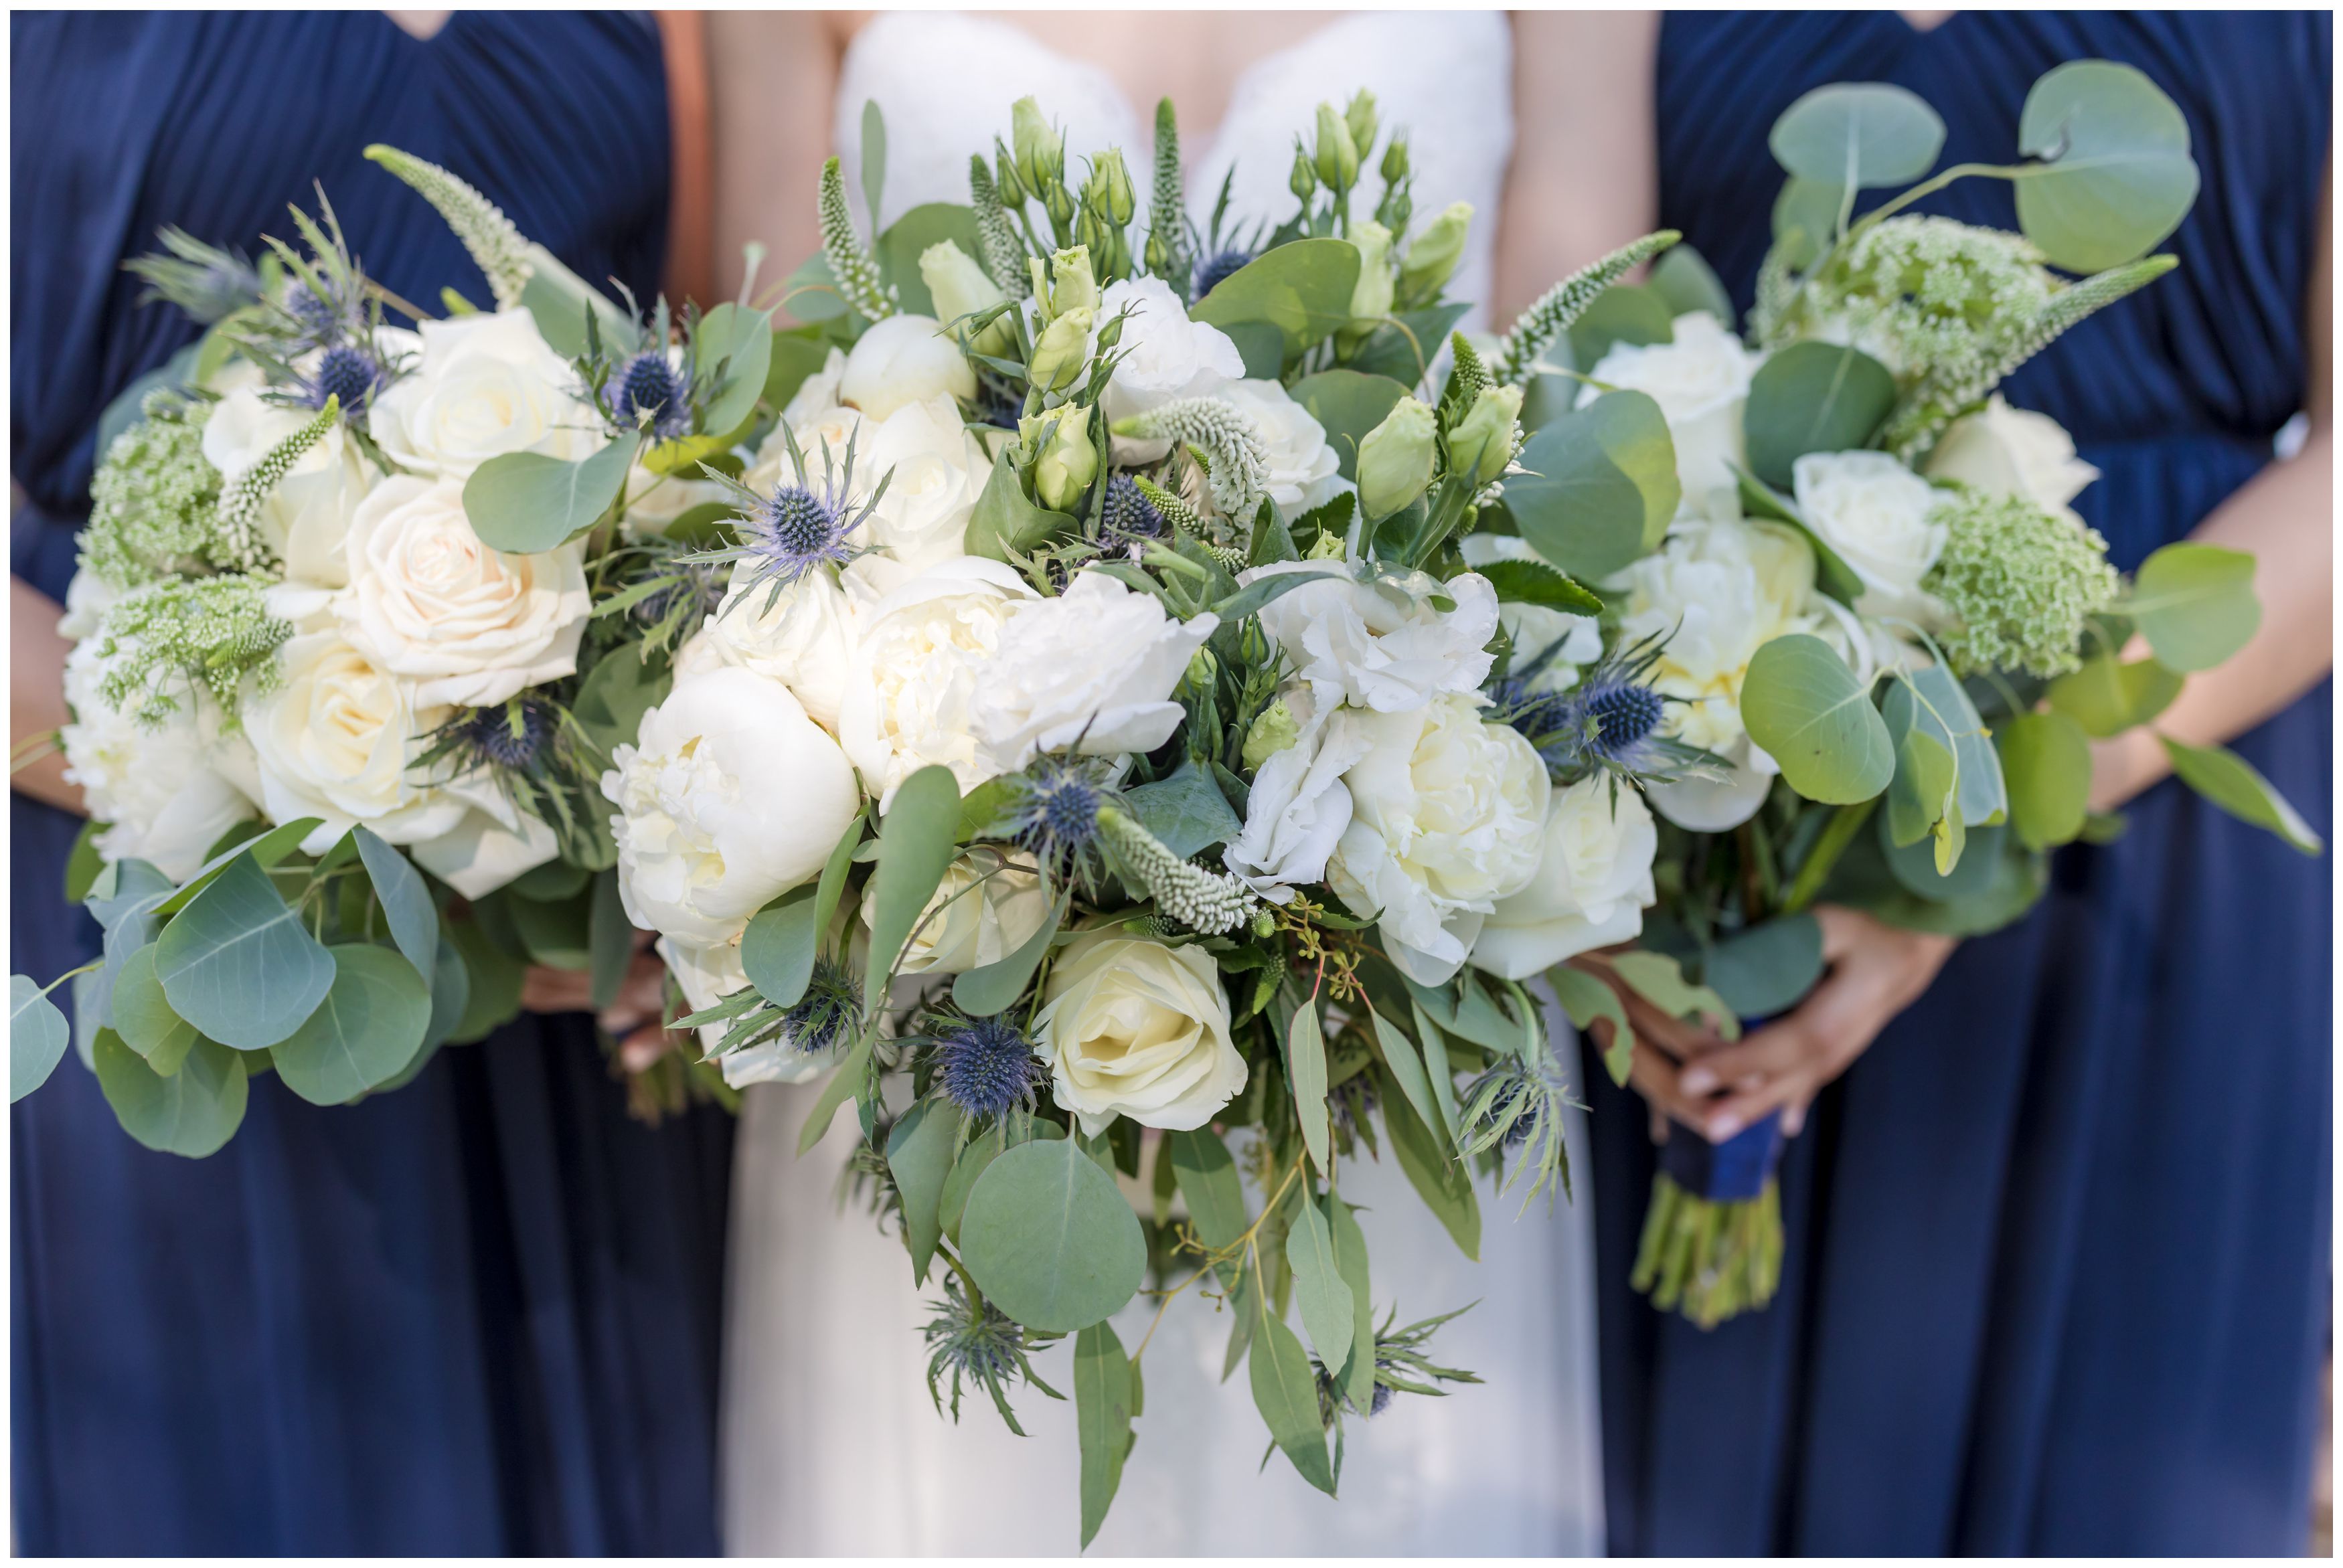 Large white peonies and white roses bride bouquet with navy bridesmaids and white roses bouquets